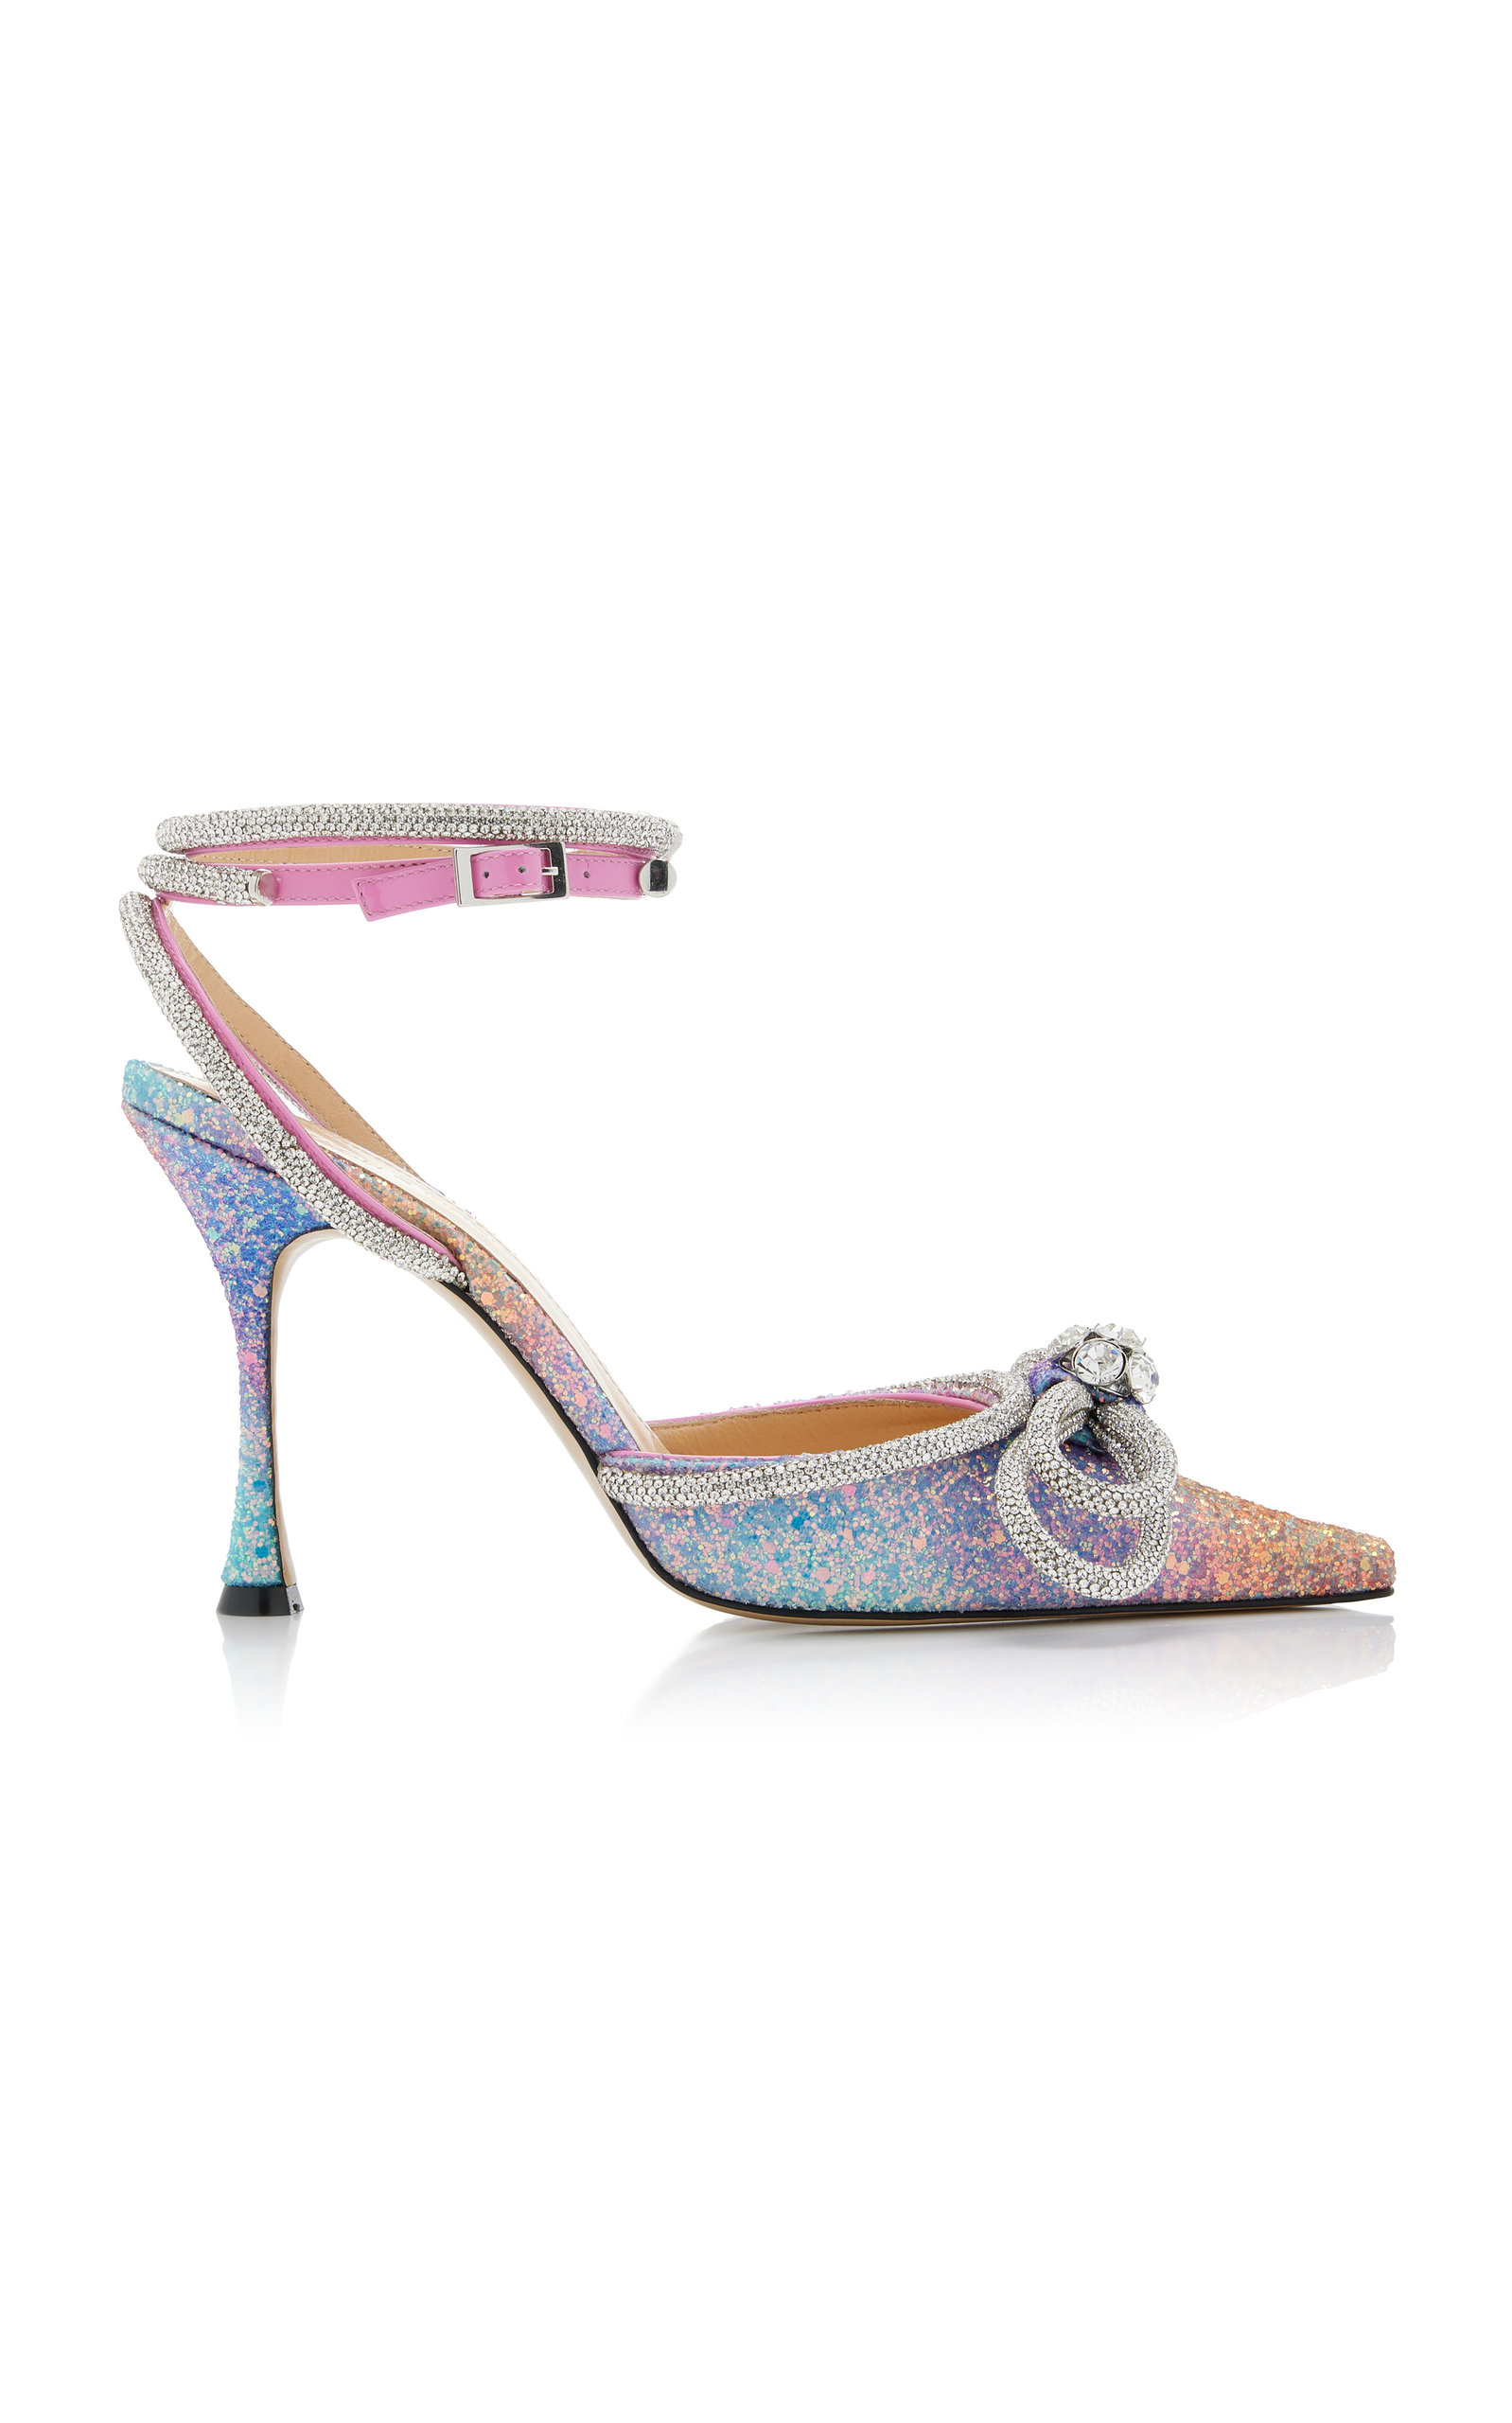 Mach & Mach Exclusive Glittered Double Bow Pumps In Multi | ModeSens